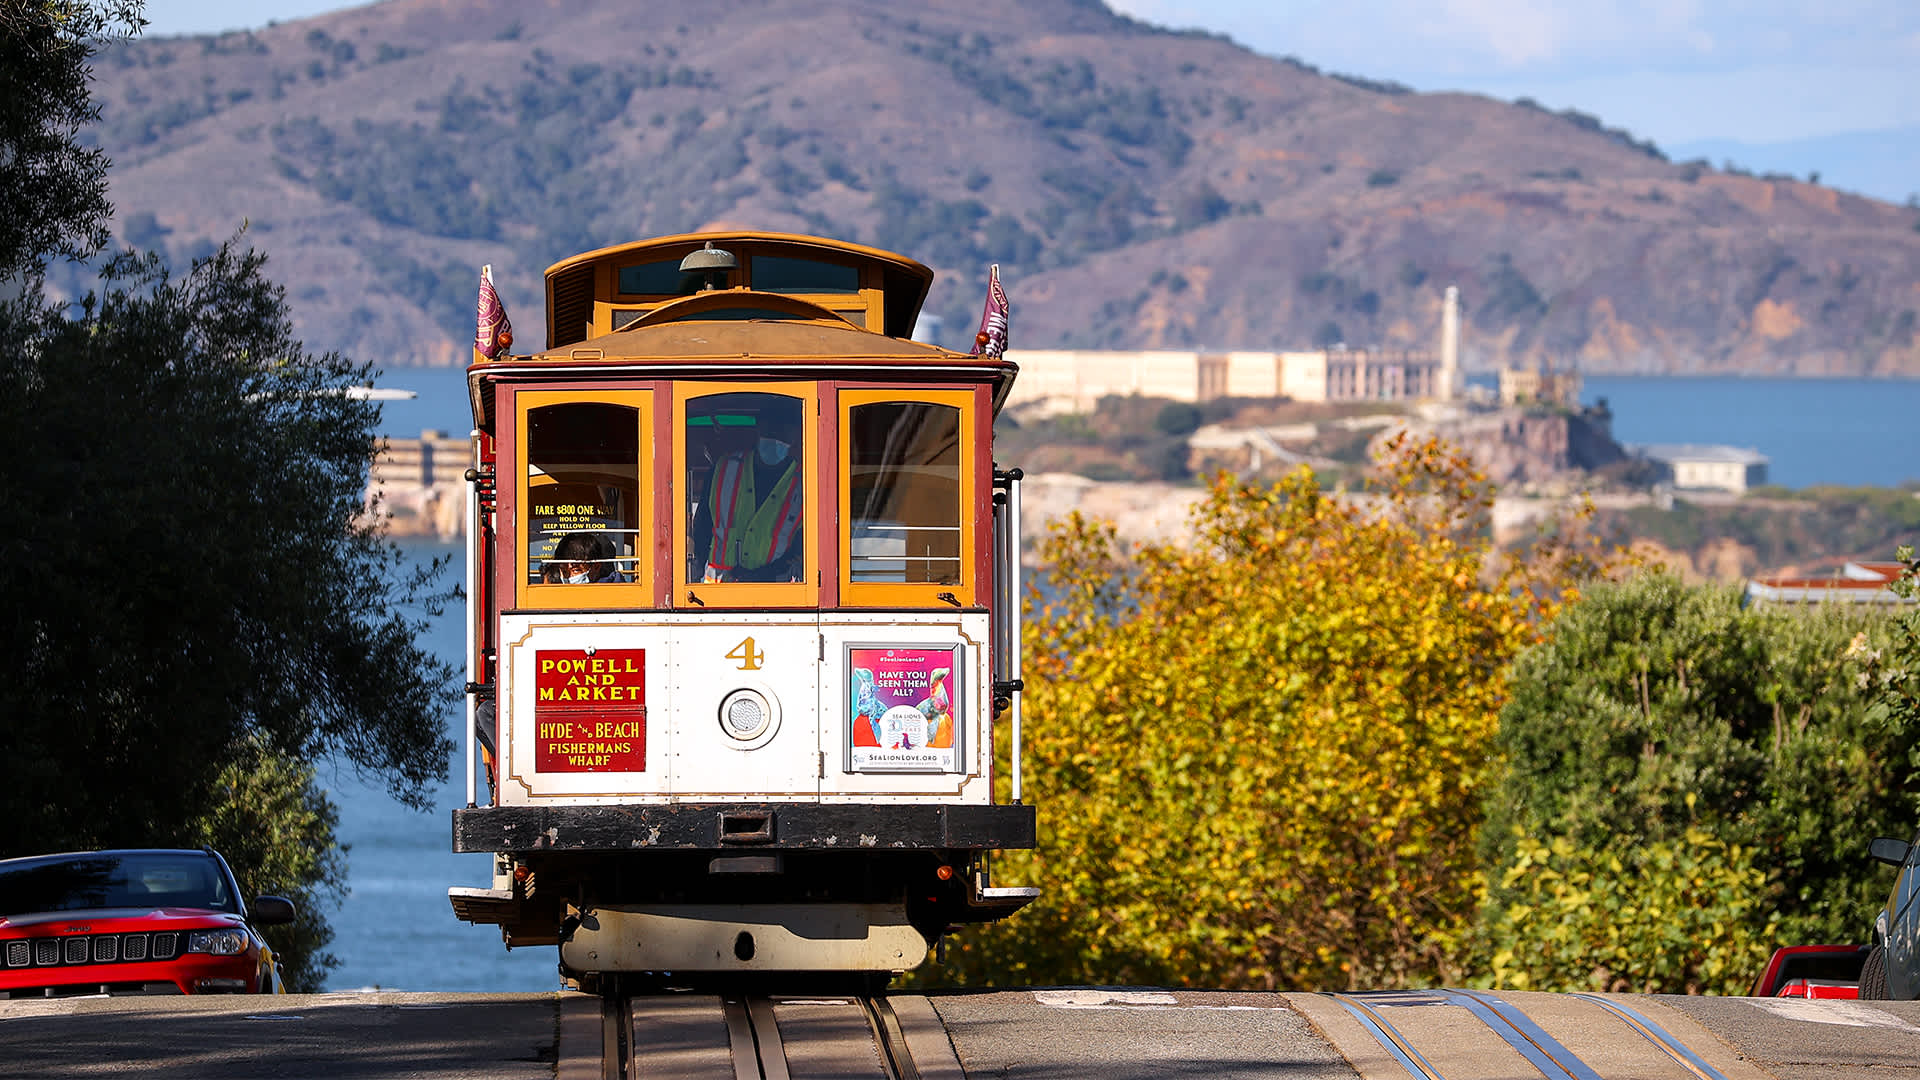 San Francisco’s famous cable car on Hyde Street in San Francisco, California. (Photo by Tayfun Coskun/Anadolu Agency via Getty Images)
